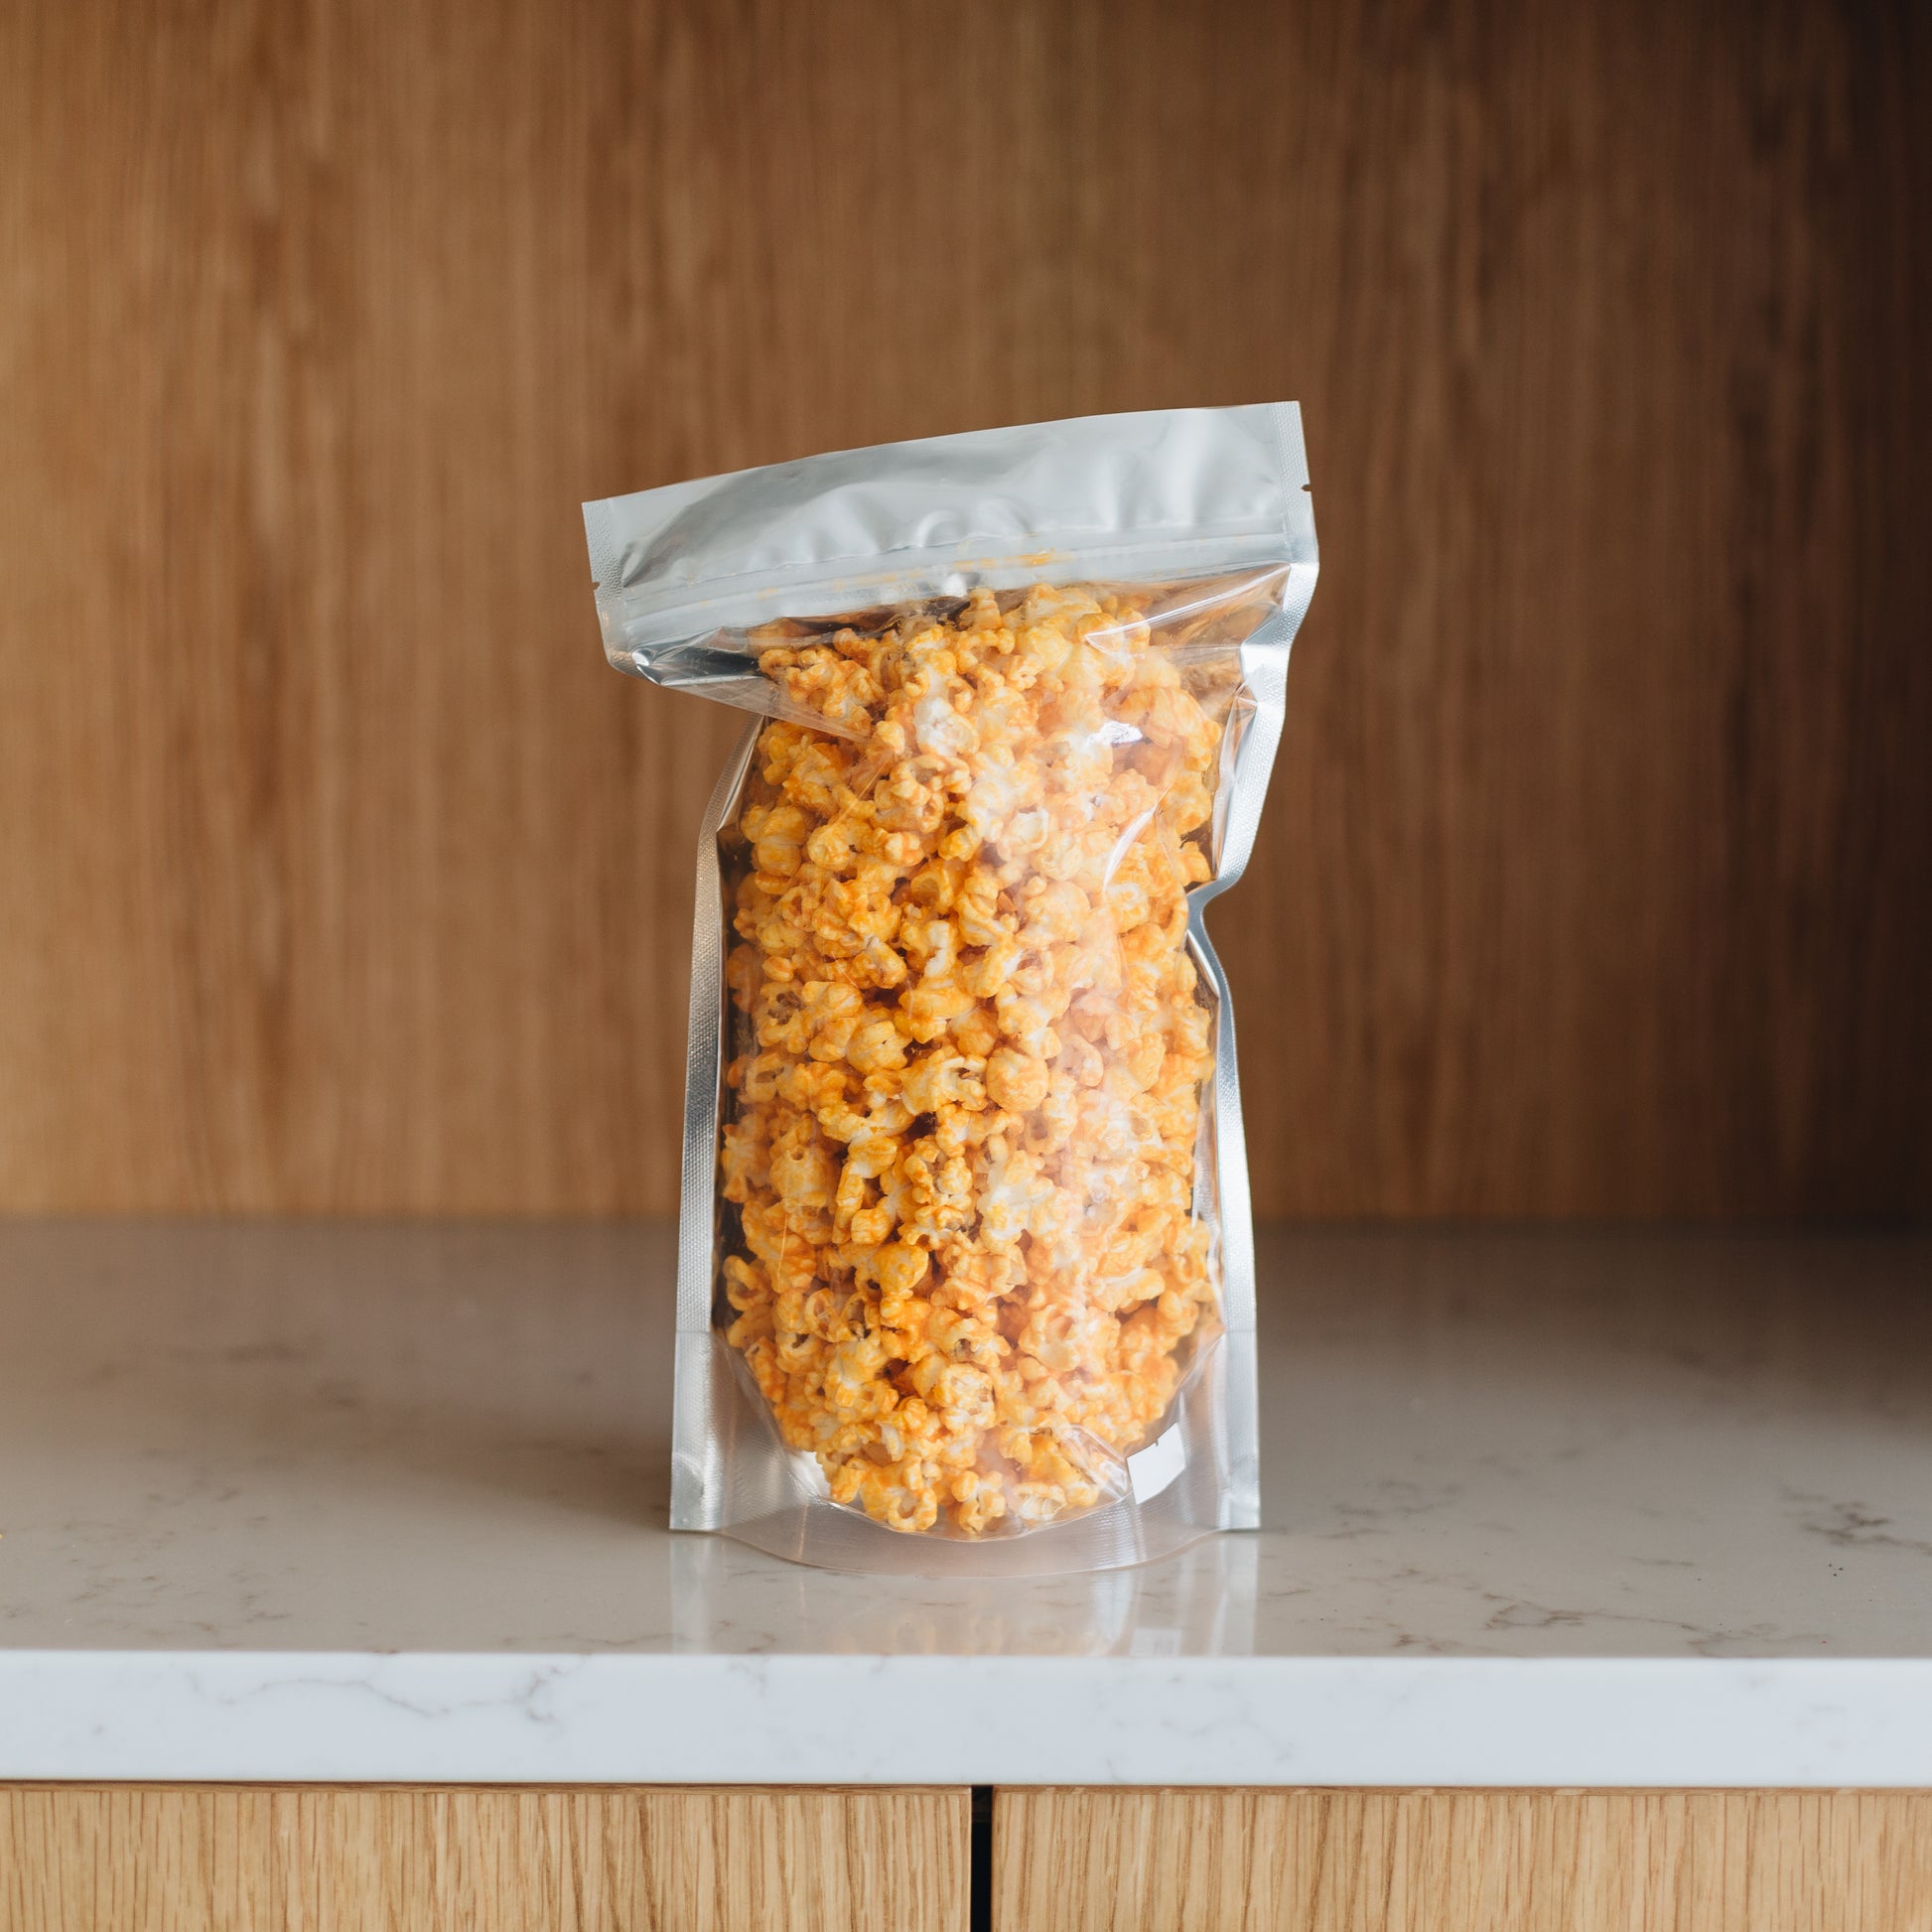 A true classic popcorn. Our Cheddar is creamy with a perfect crunchy popcorn. Get this wonderful tasting popcorn now. Order it online or stop in Popnotch Goods to get the best tasting cheddar popcorn. Featured is our Large Bag of Cheddar Popcorn (3.5oz)